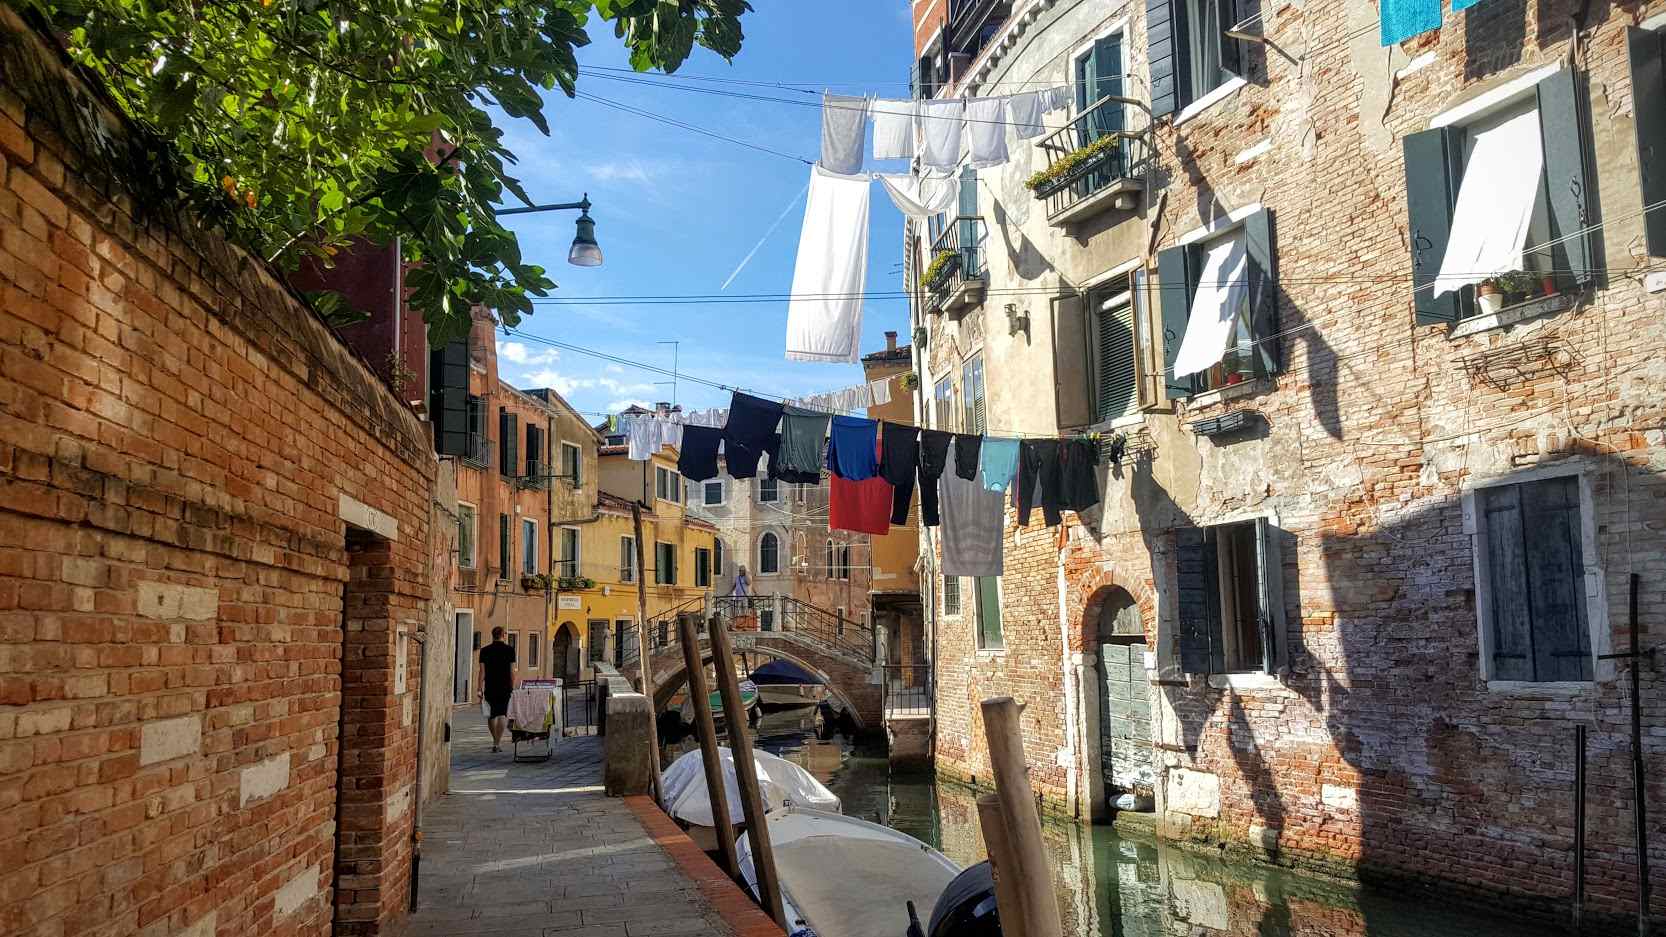 a street in venice with colourful clothes hanging to dry above a canal